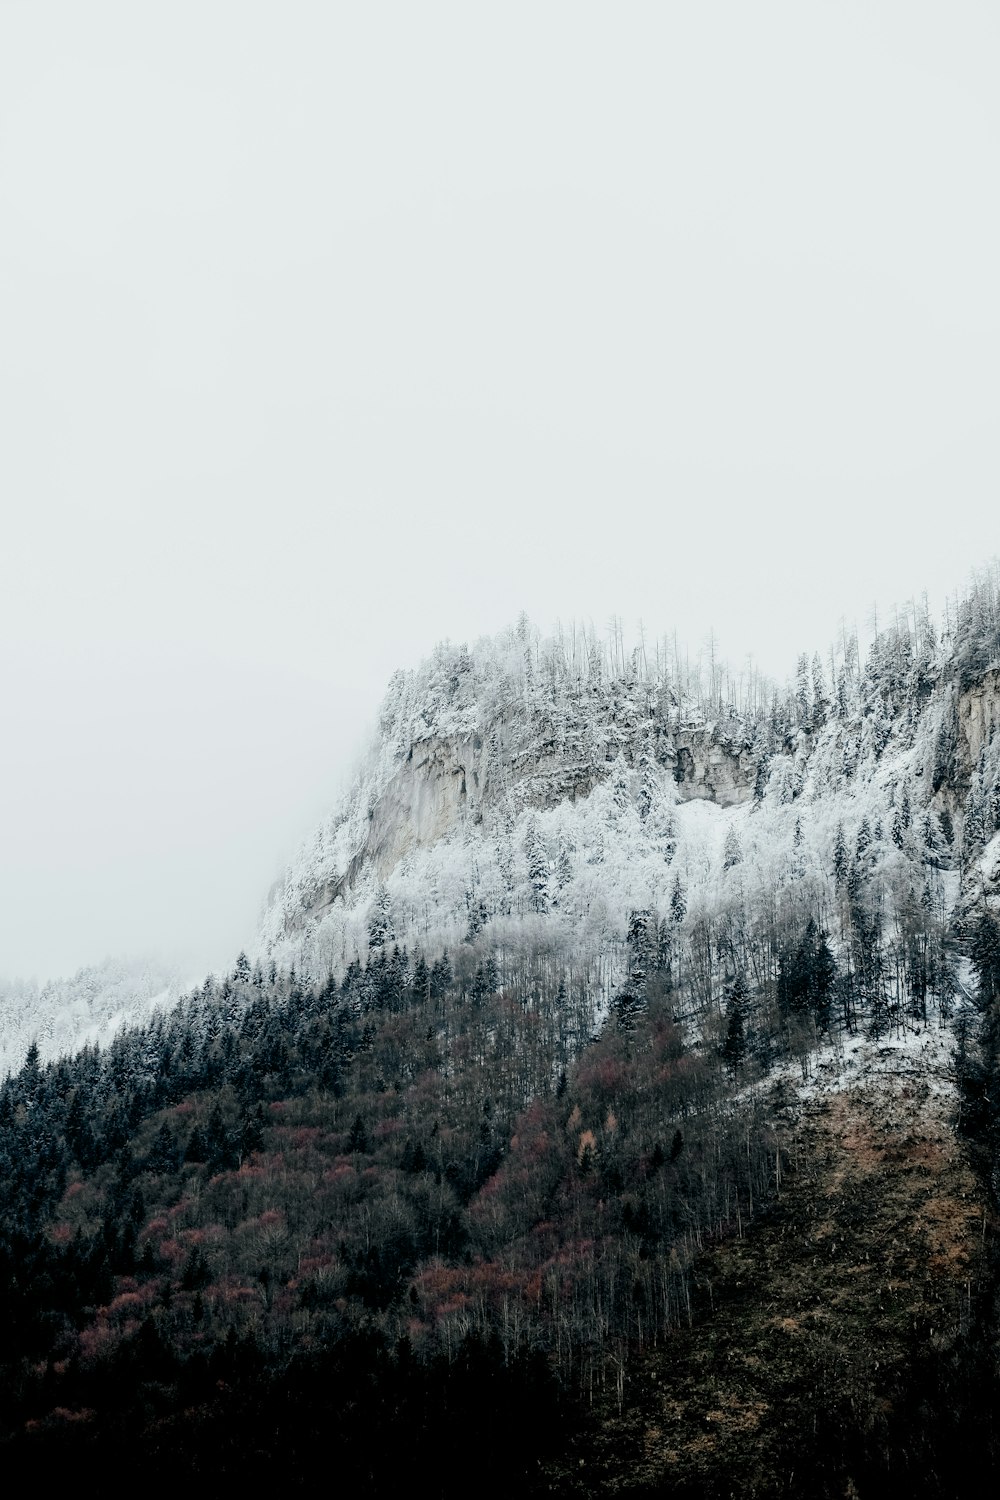 a mountain covered in snow with trees on the side